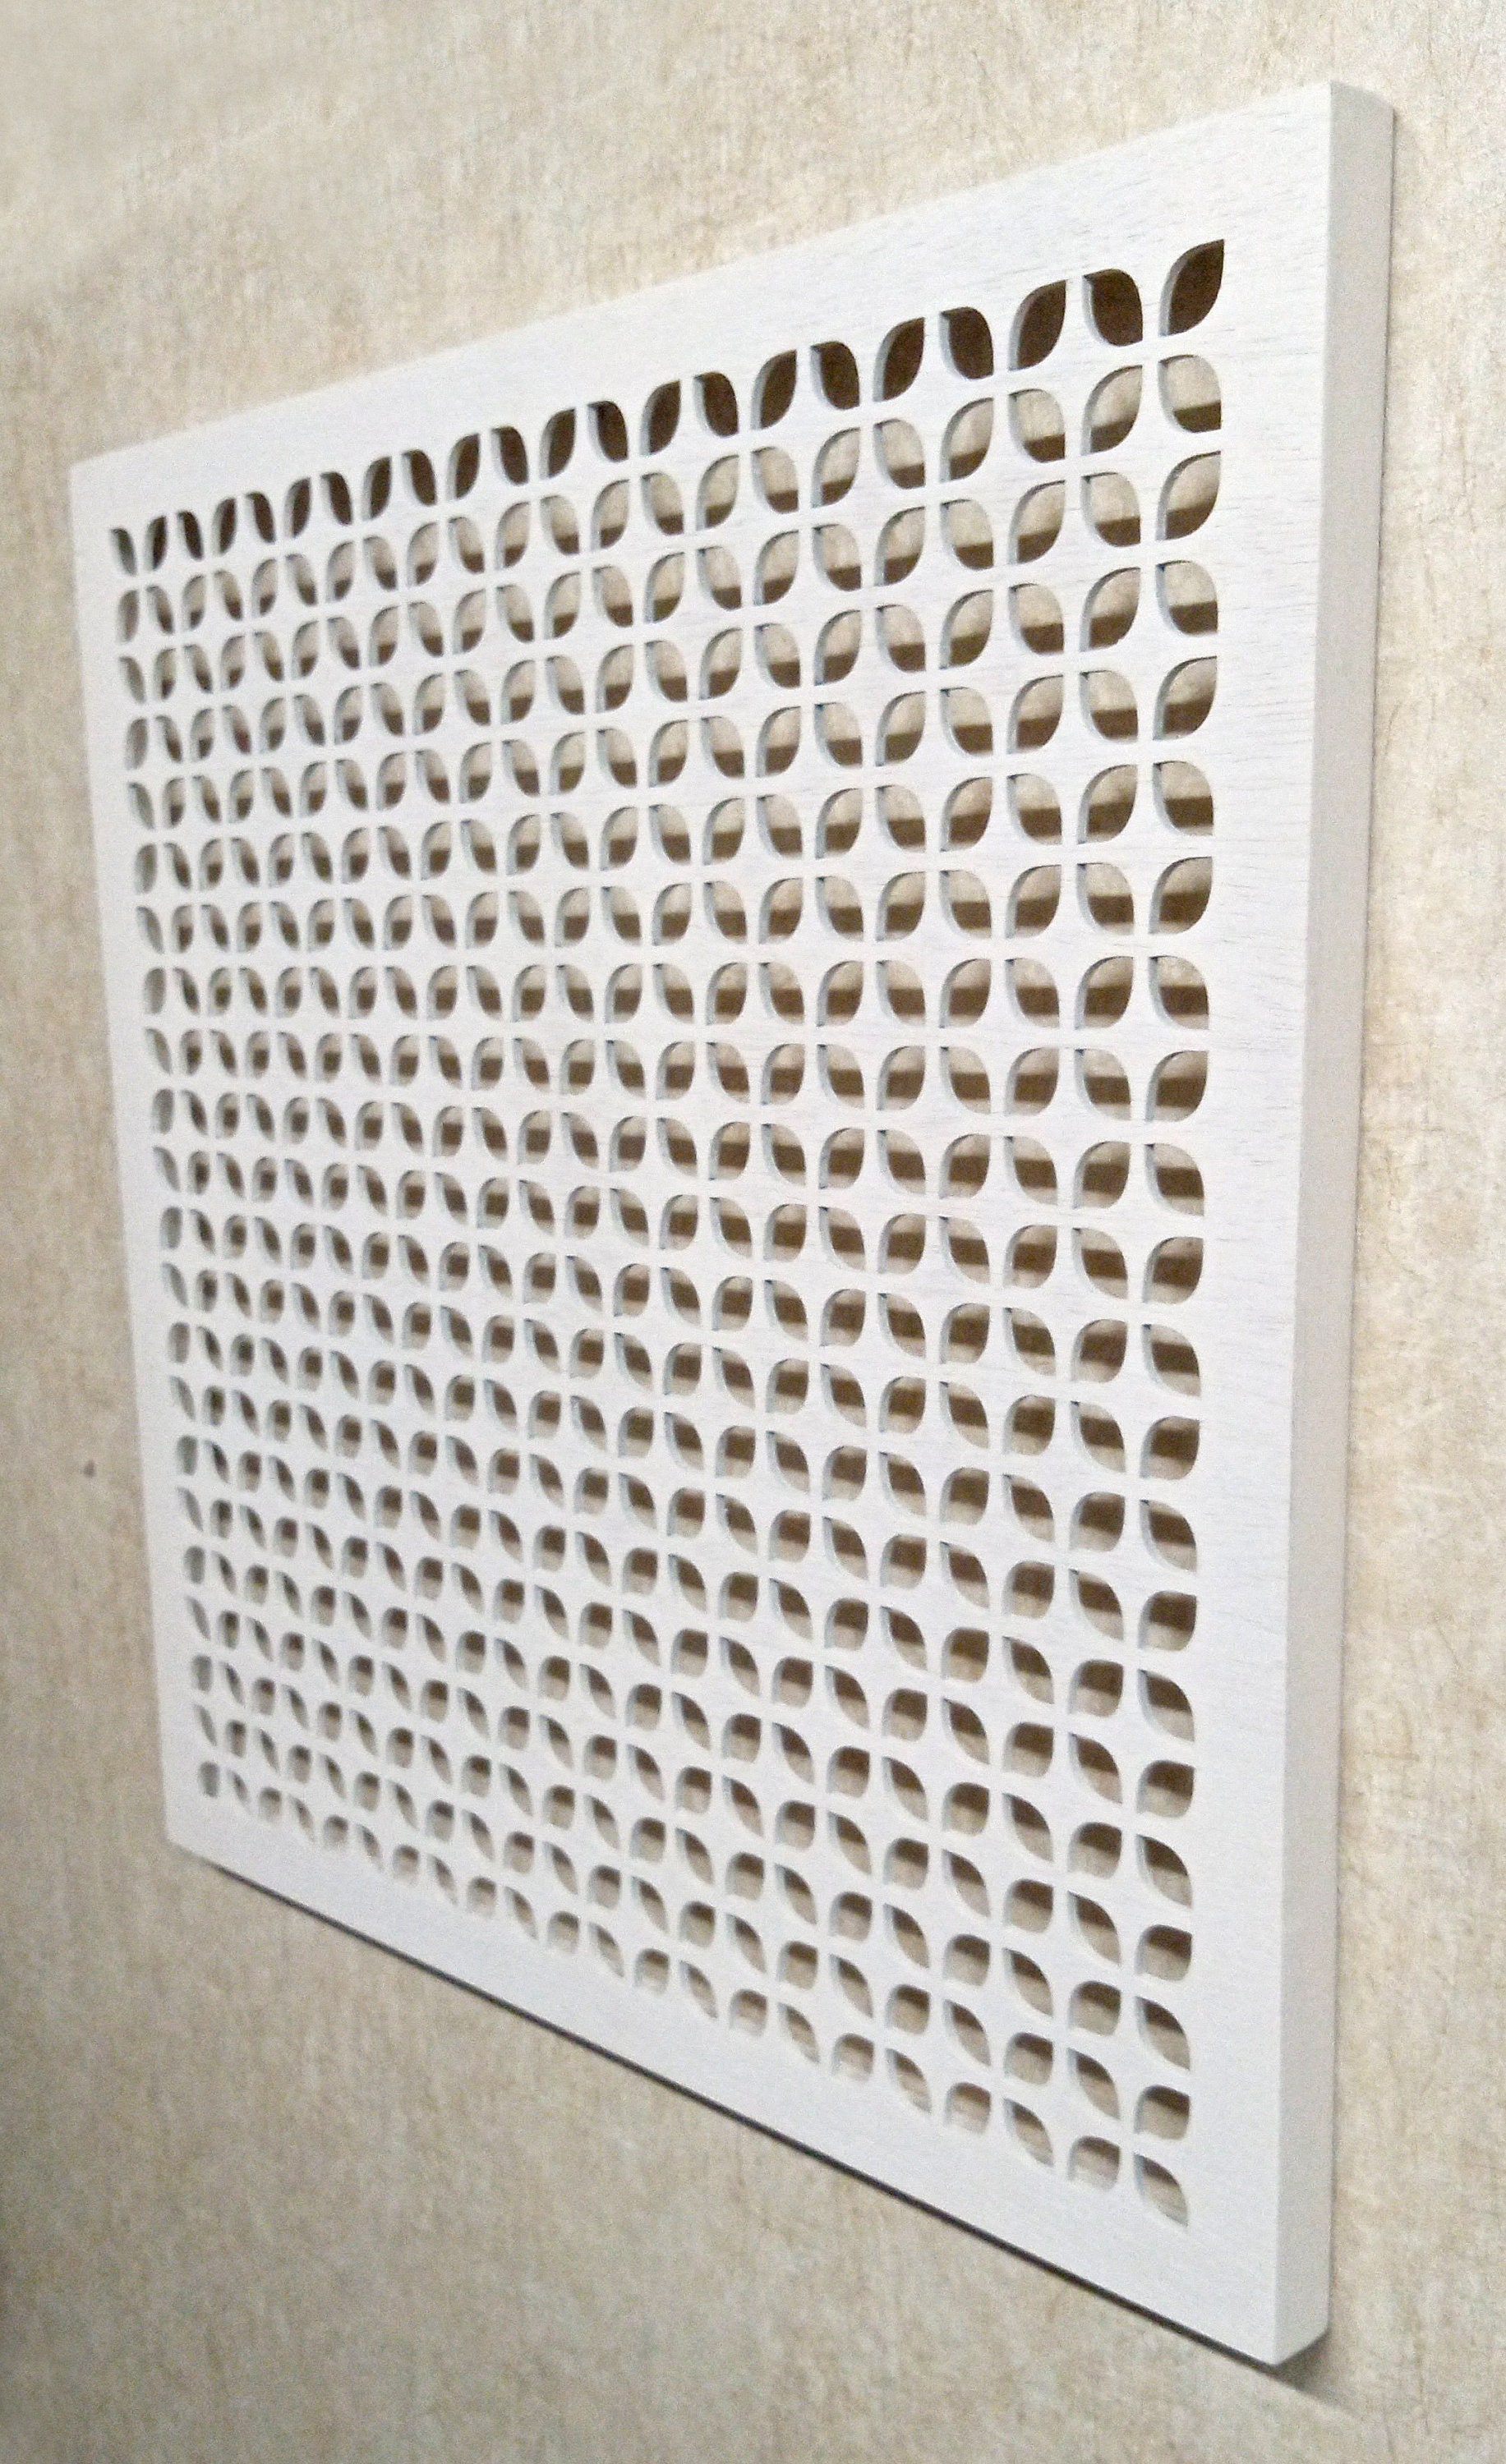 Custom Air Vent Cover Return Air Vent Cover wall Intake Vent Cover Custom  Size Vent Cover for Home Decor Magnetic Vent Cover Decorative 